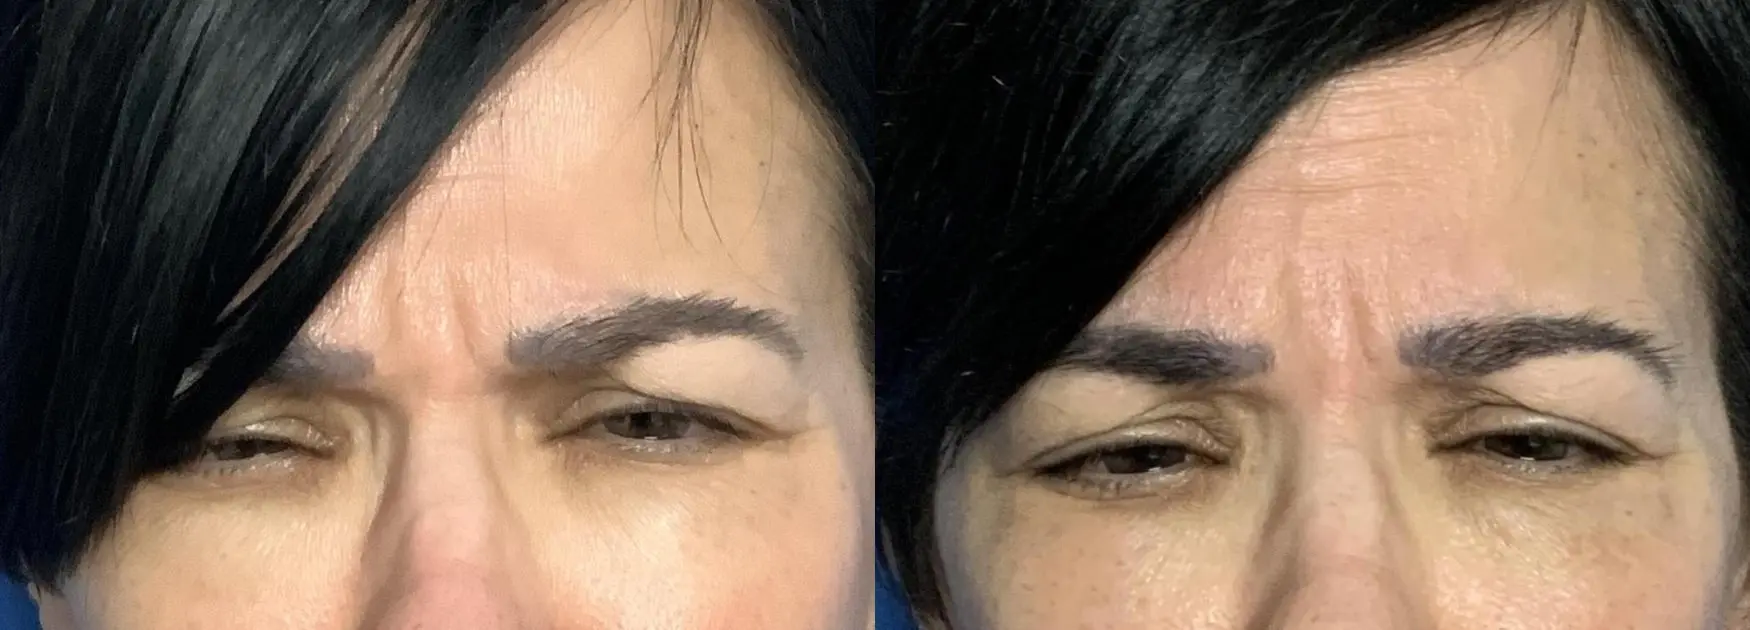 patient 13391 fillers before and after result - Before and After 1